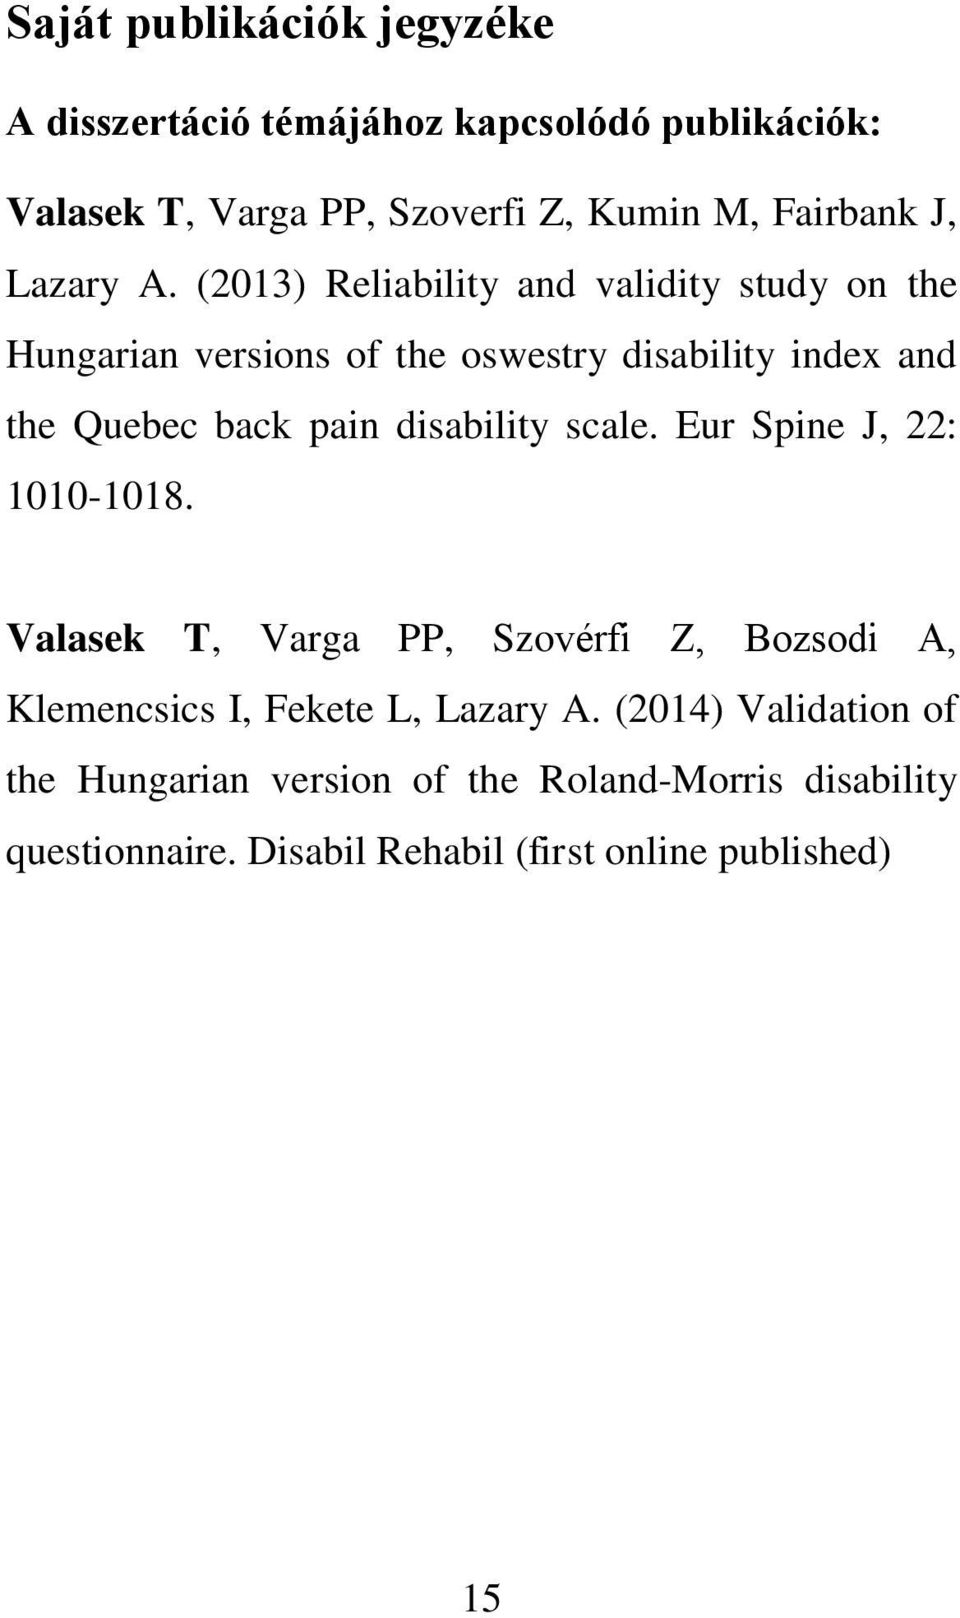 (2013) Reliability and validity study on the Hungarian versions of the oswestry disability index and the Quebec back pain